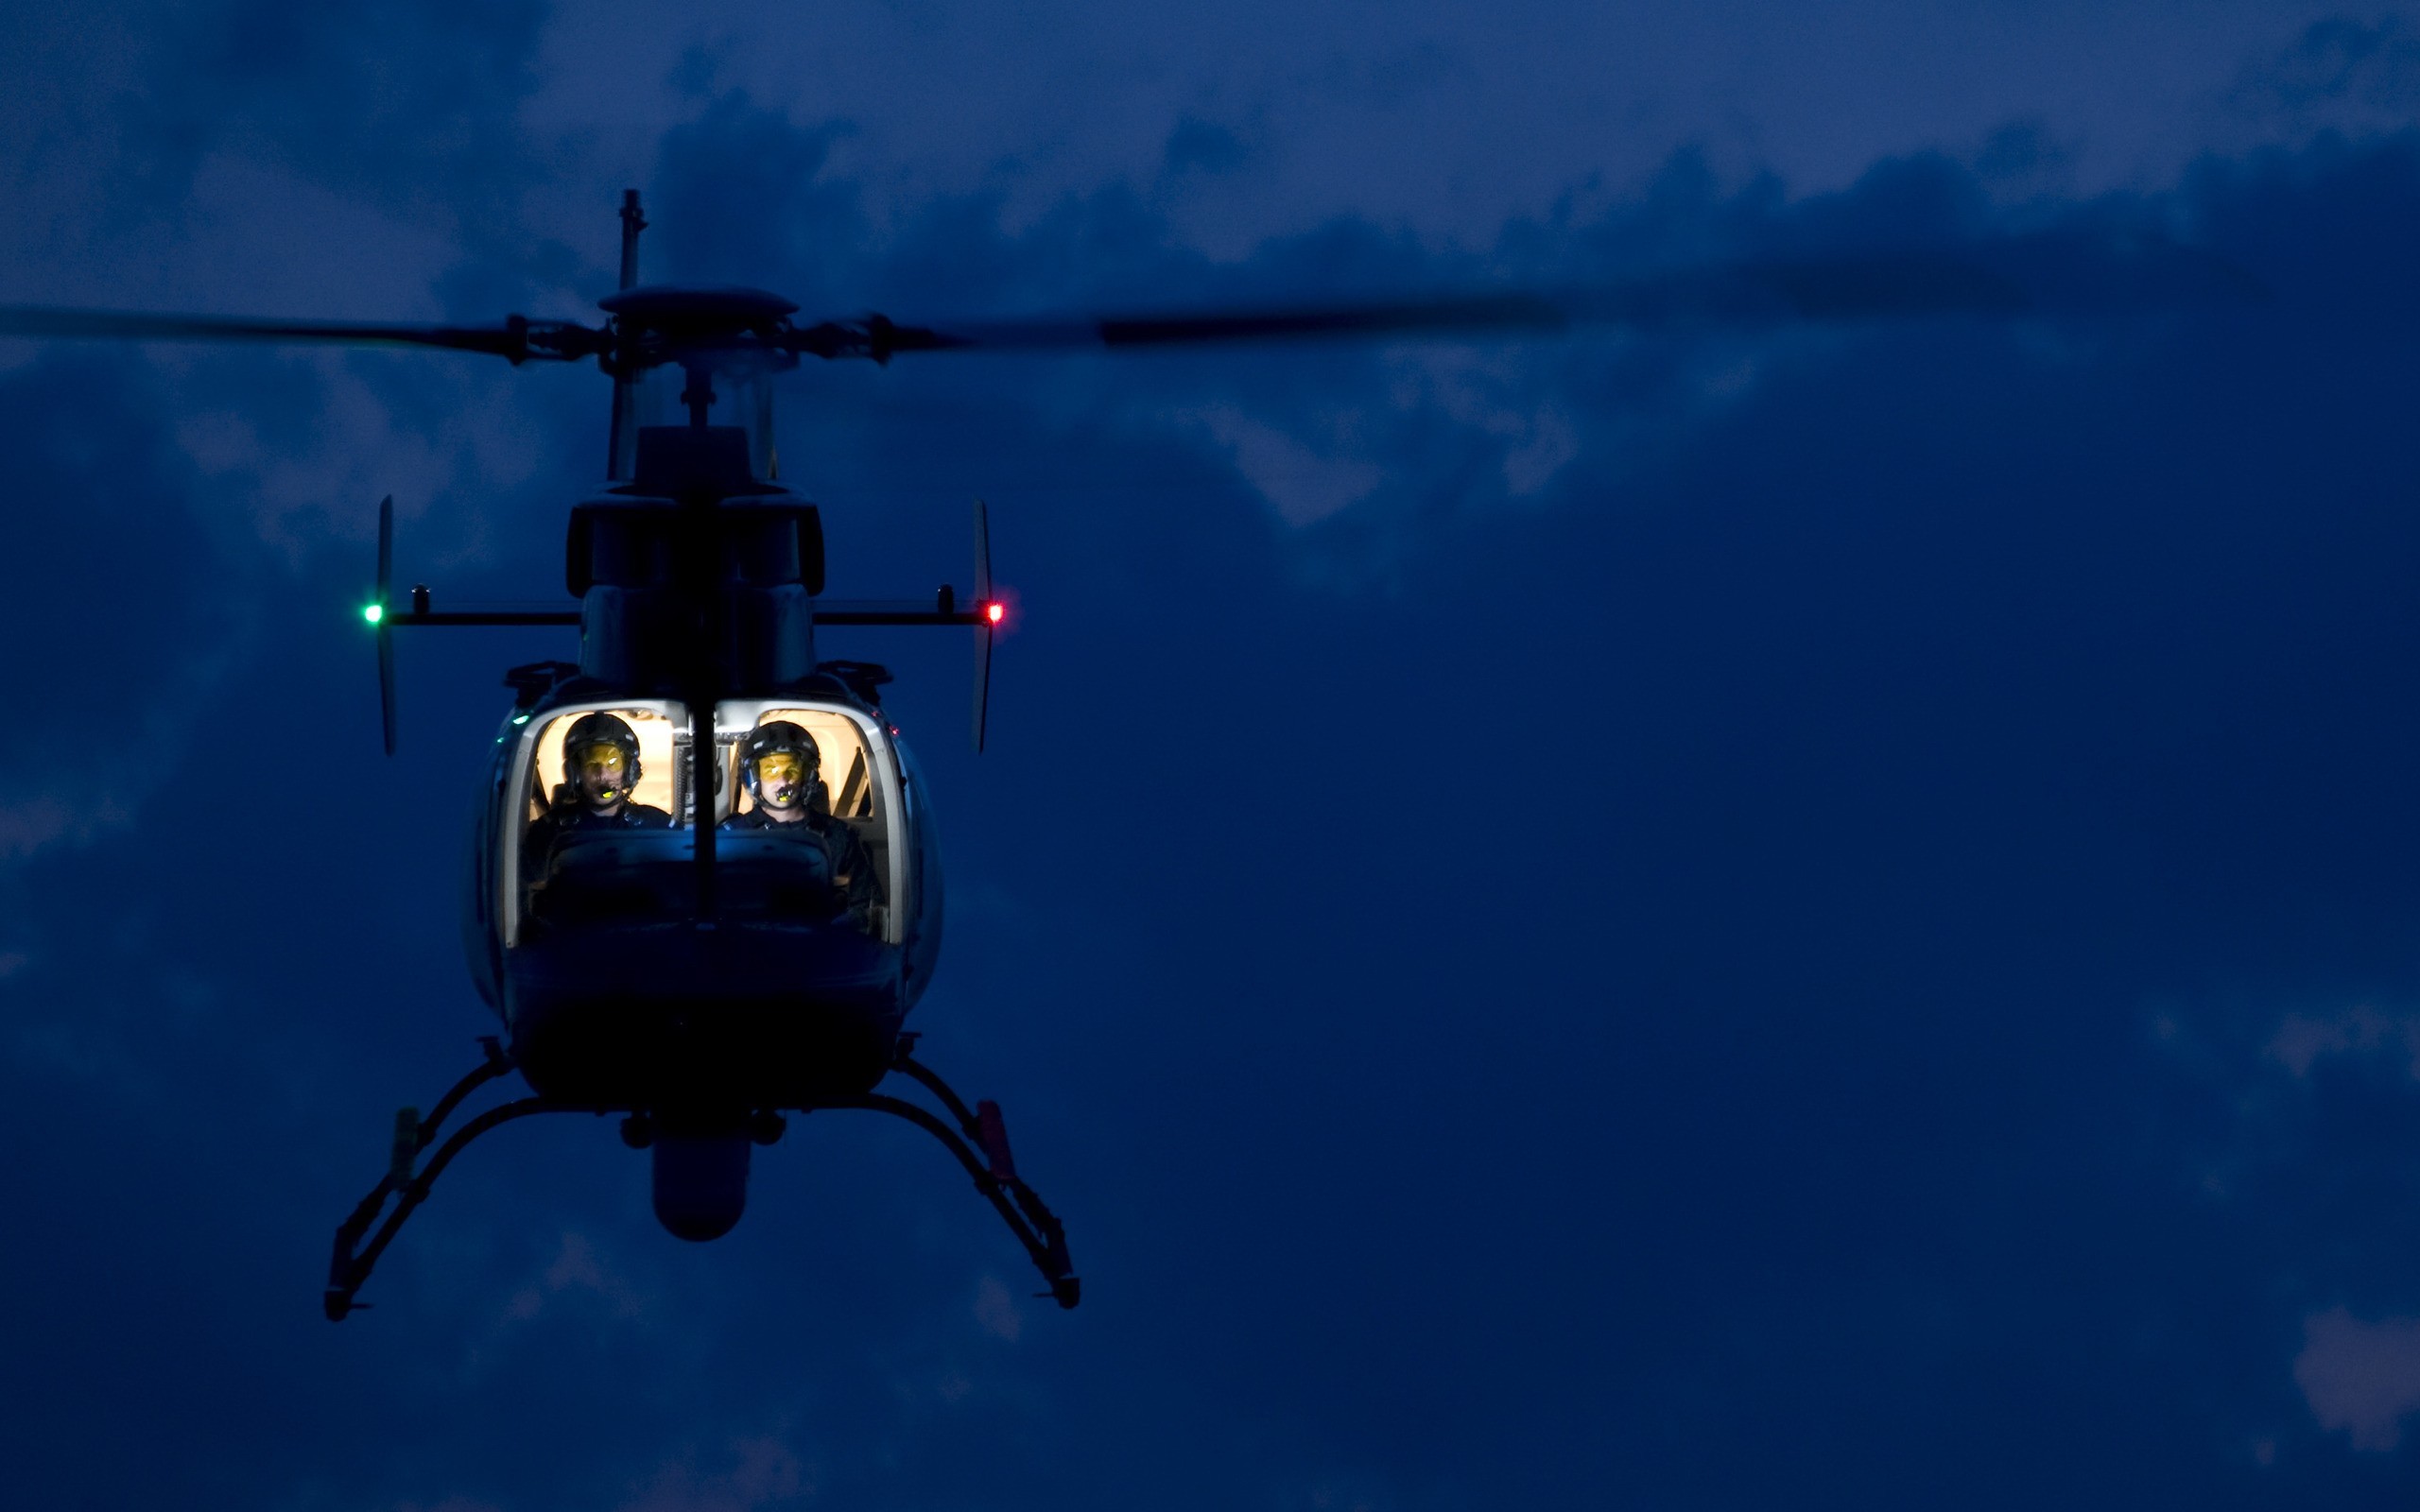 General 2560x1600 helicopters night vehicle blue men clouds sky